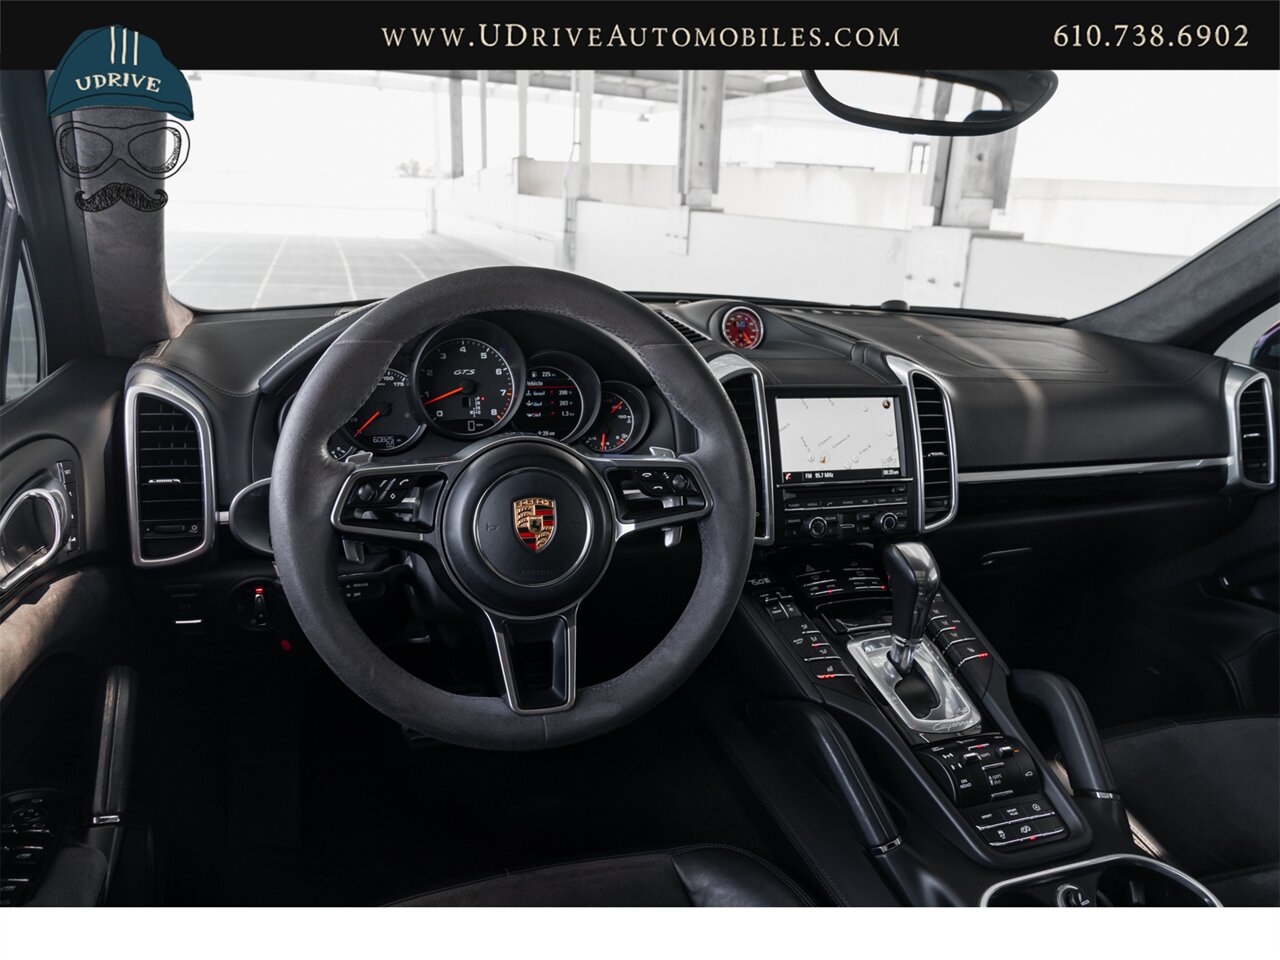 2016 Porsche Cayenne GTS  CPO Warranty 21in Whls Sport Chrono Red Dial Alcantara Red Belts Pano - Photo 32 - West Chester, PA 19382